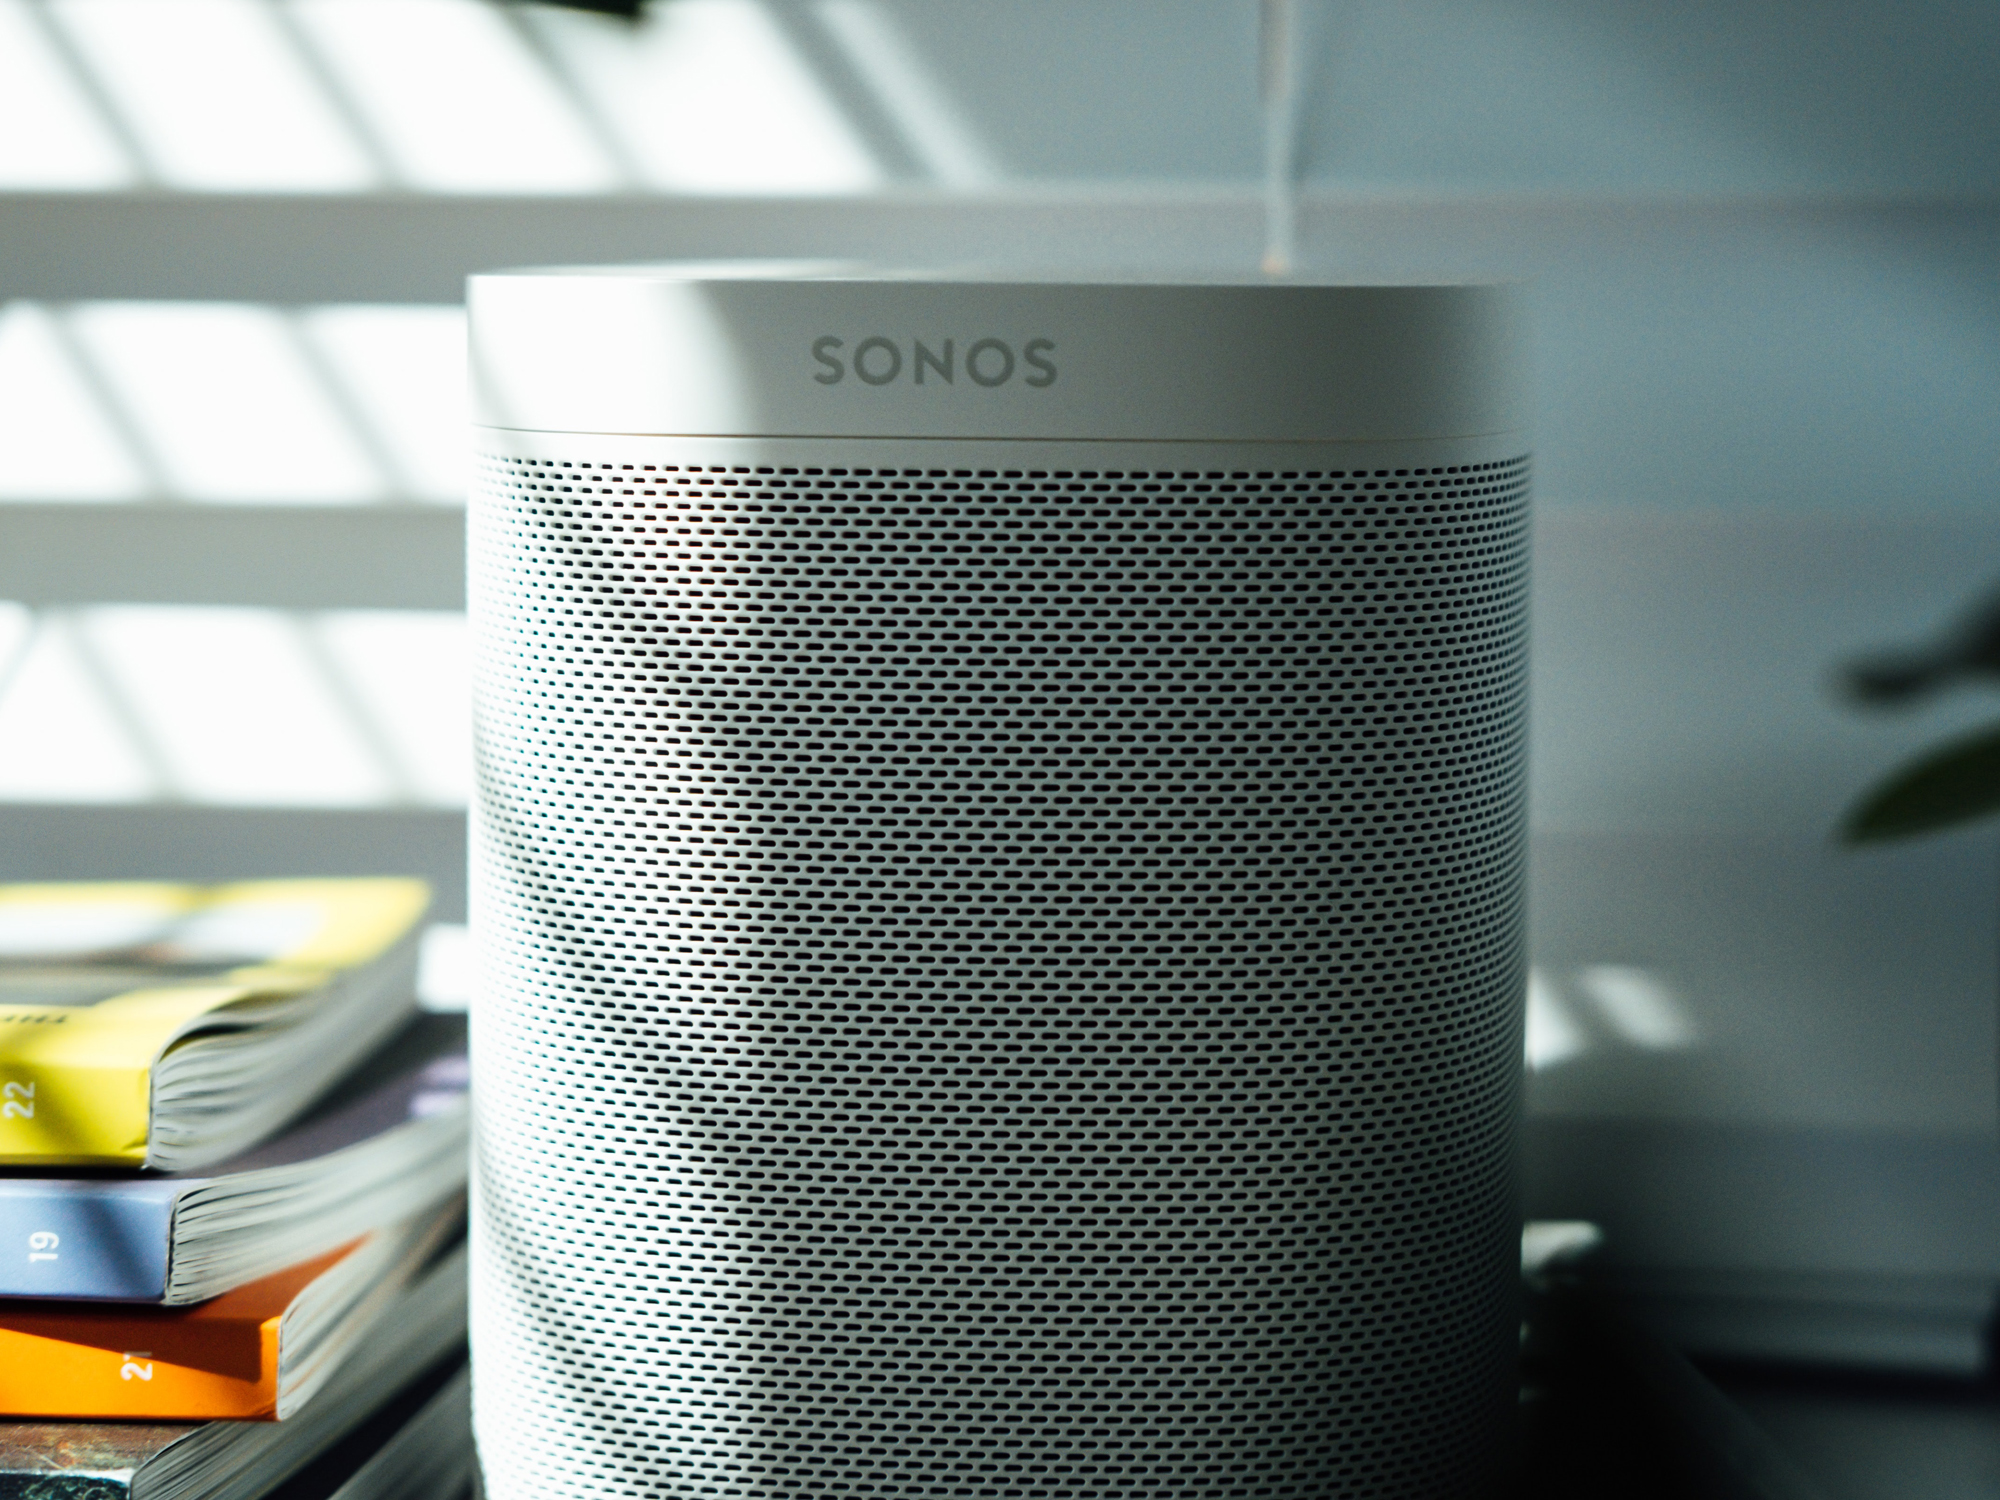 How to control your Sonos speaker with only your voice